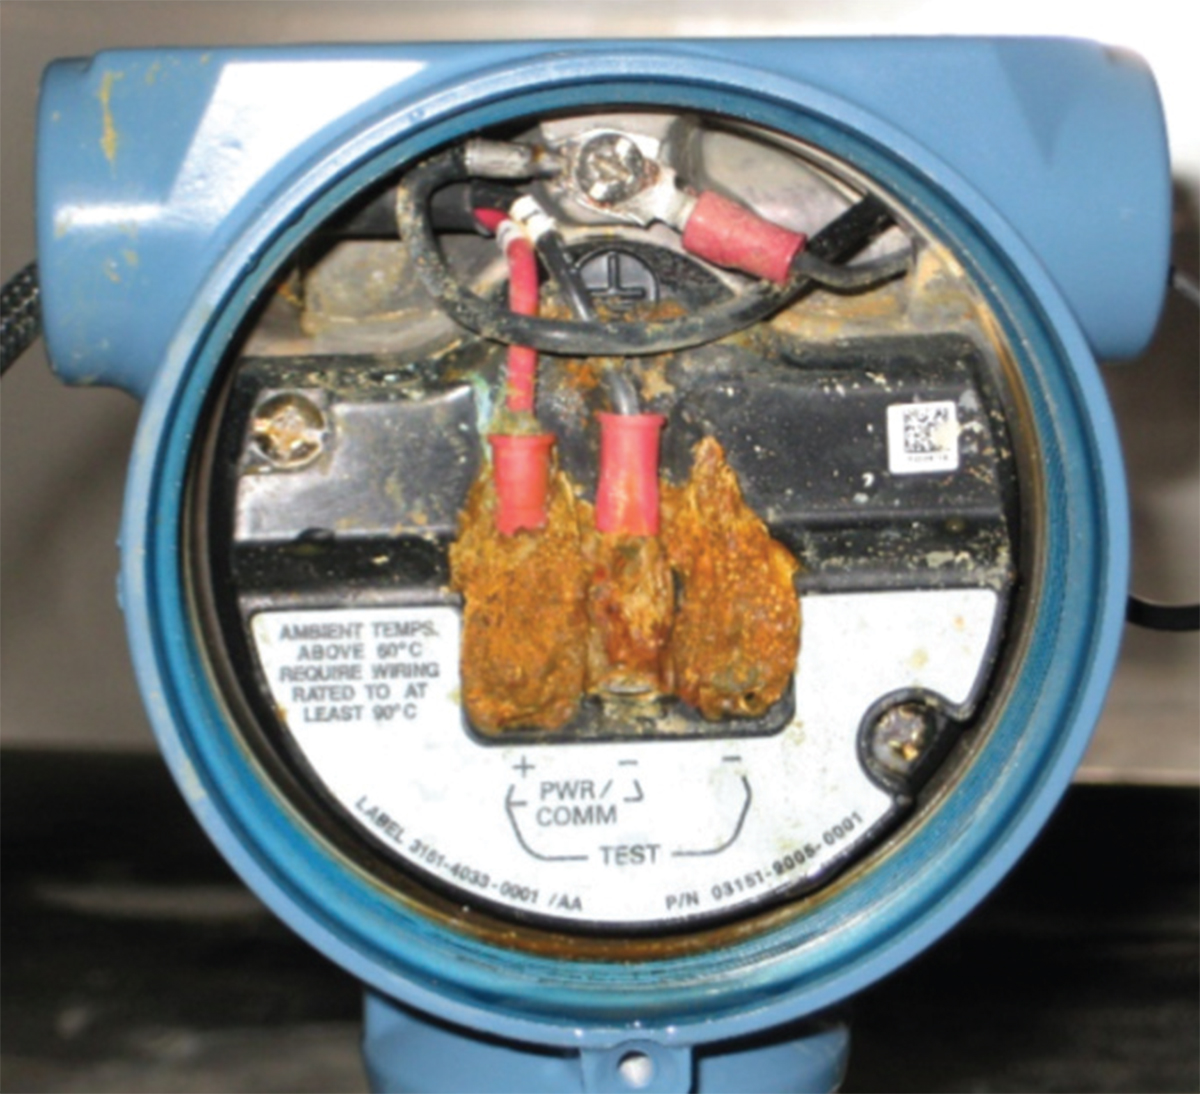 Neglecting to include conduit entry seals can lead to moisture entering the sensor’s housing.